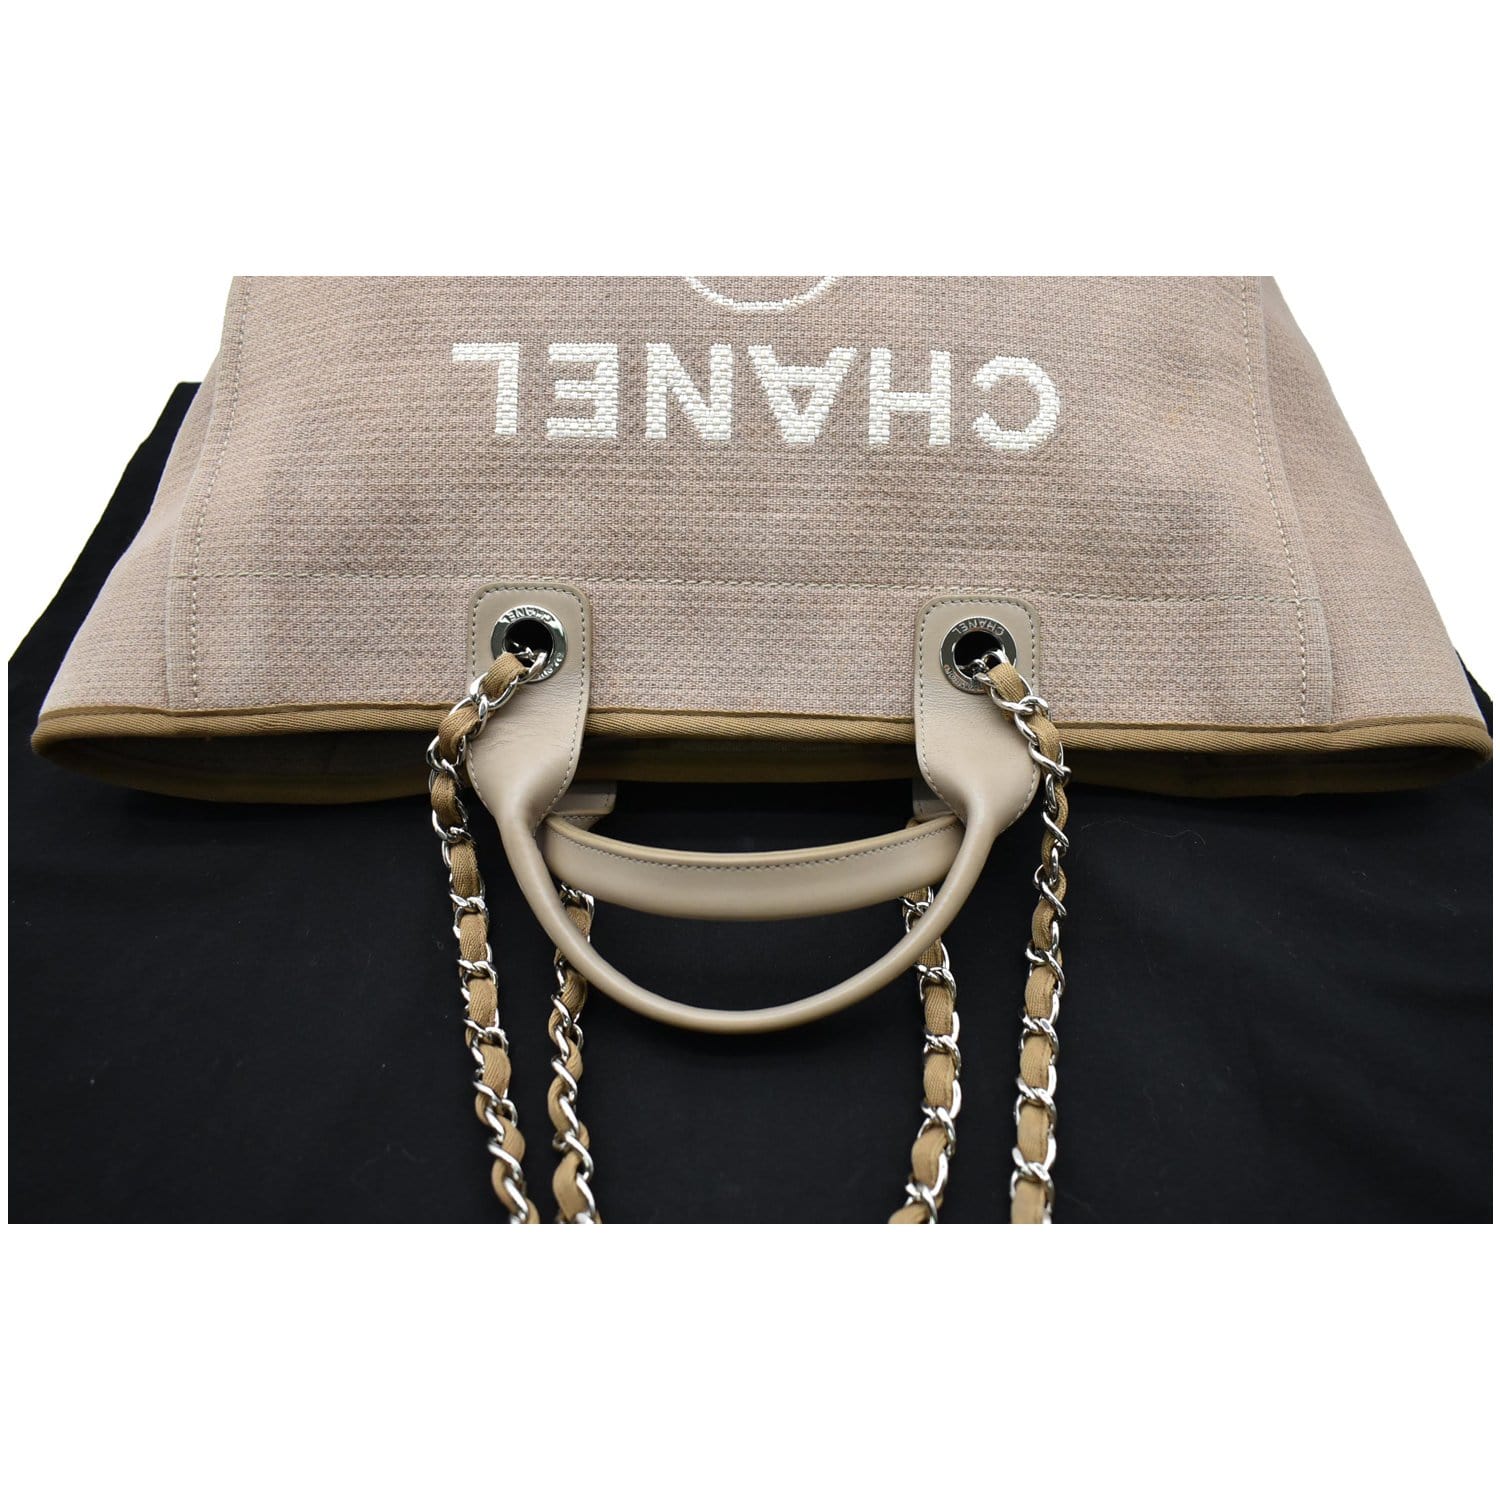 Chanel Dark Beige Canvas Small Deauville Tote Bag with CC Logo Print a –  Sellier